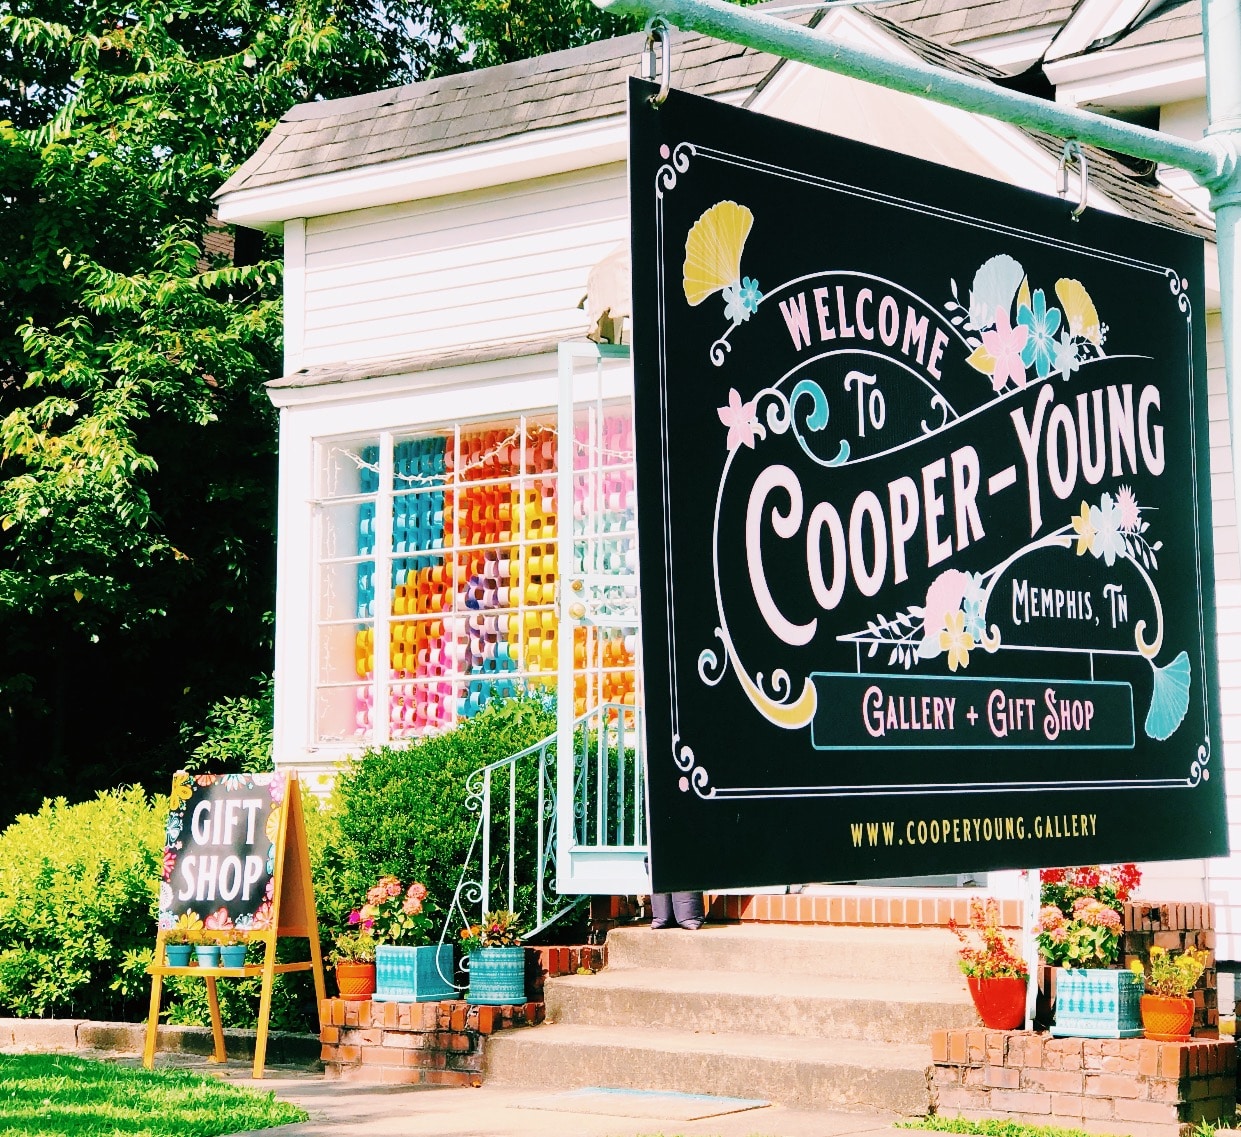 A sign welcoming visitors to Cooper Young, an ideal neighborhood for those moving to Memphis.